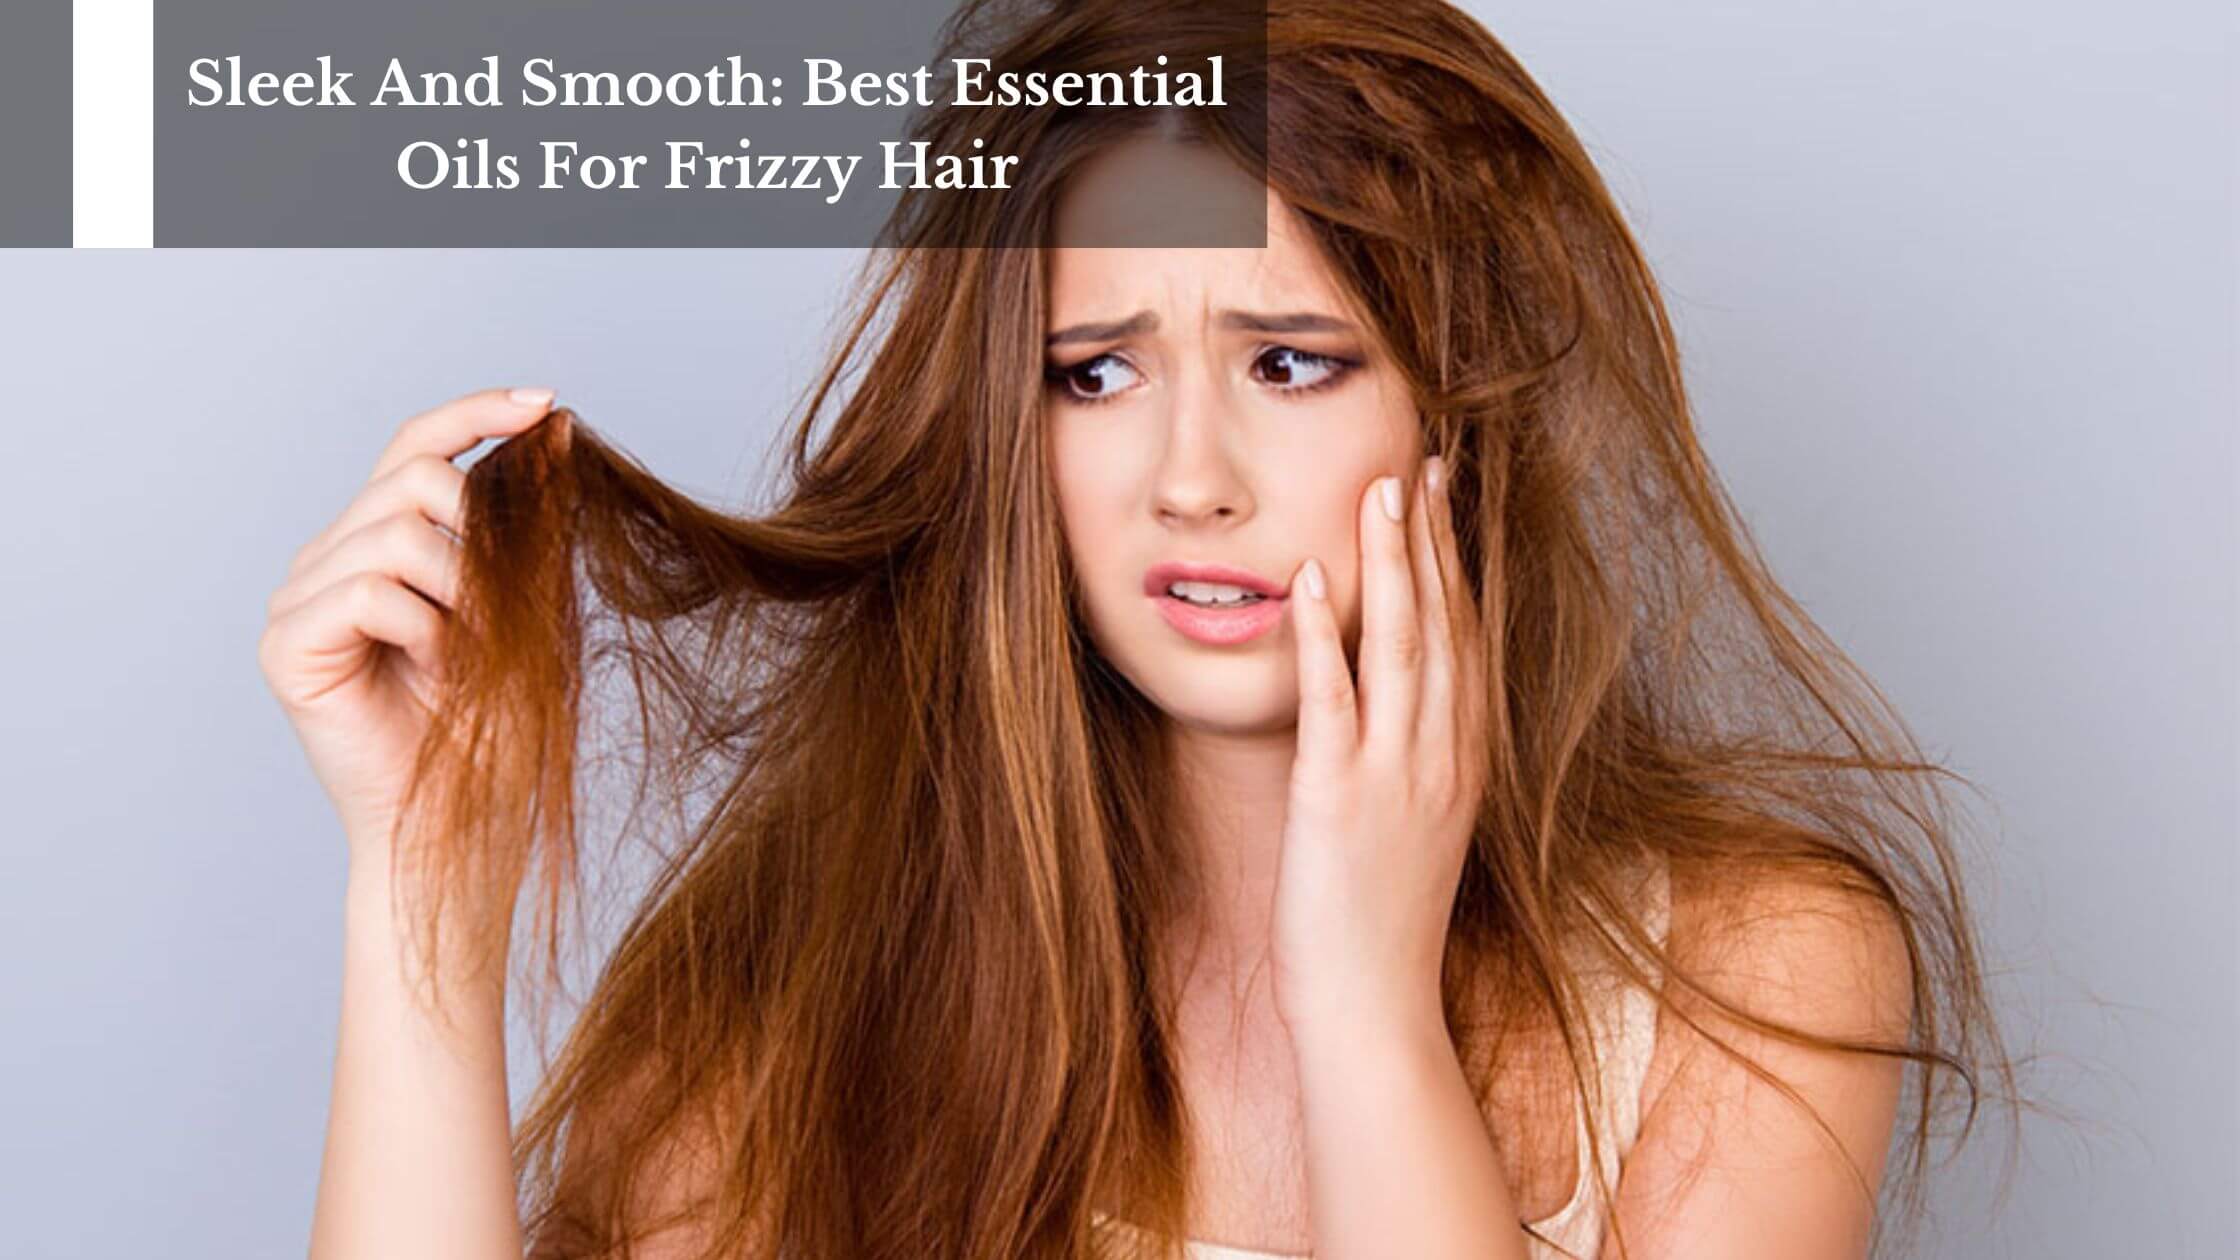 Sleek And Smooth: Best Essential Oils For Frizzy Hair